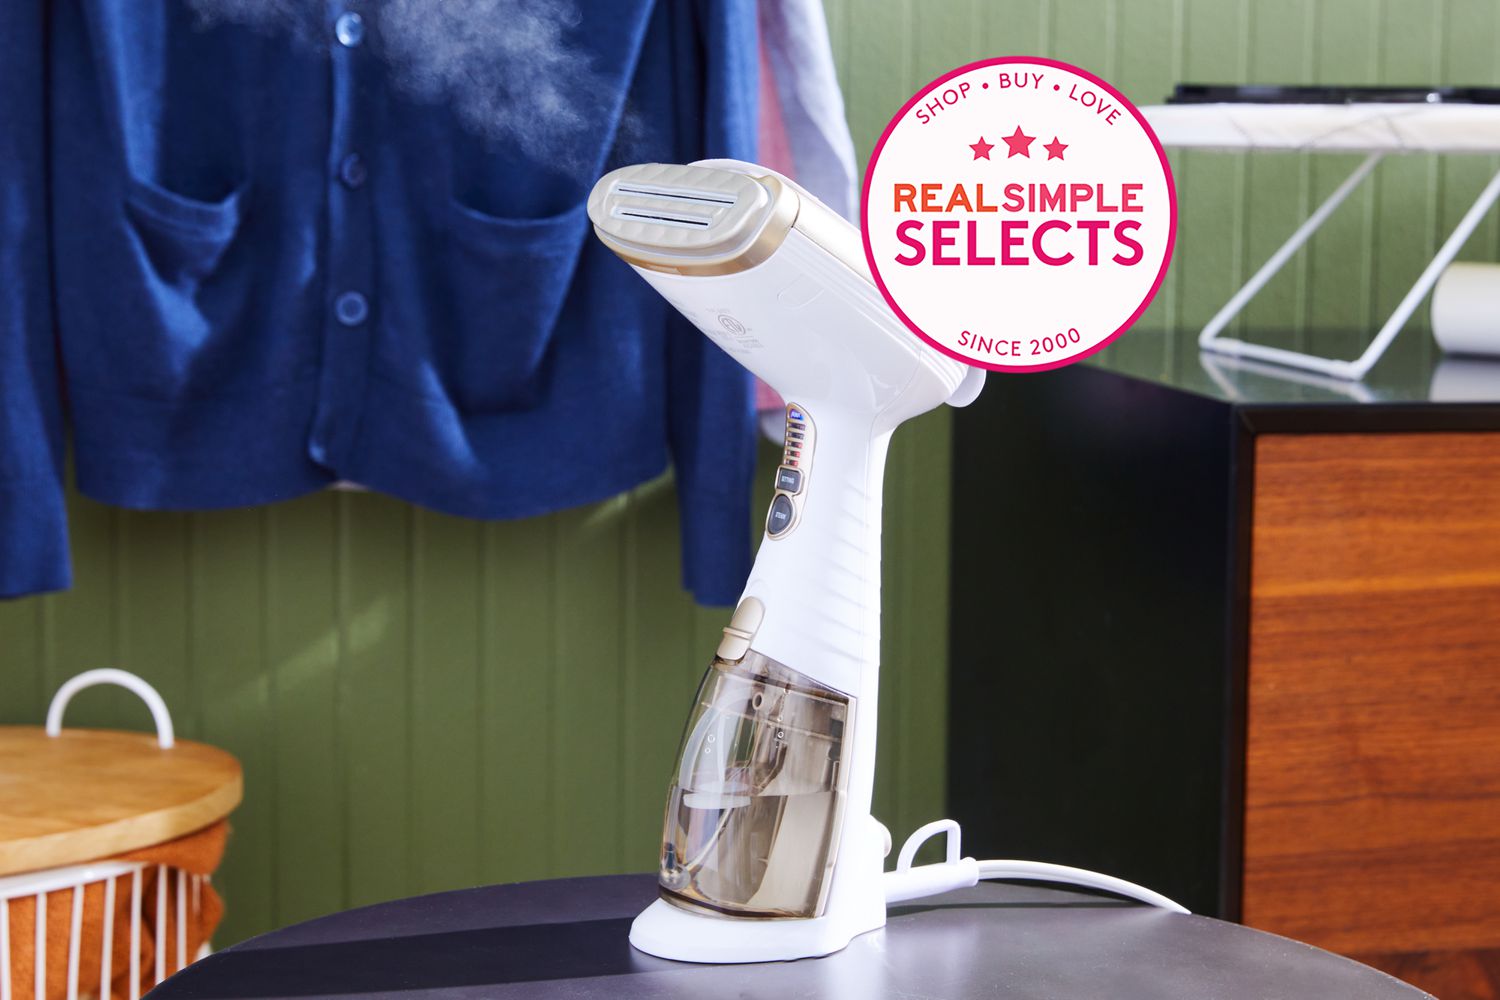 Conair Turbo ExtremeSteam Hand-Held Fabric Steamer displayed on a round table